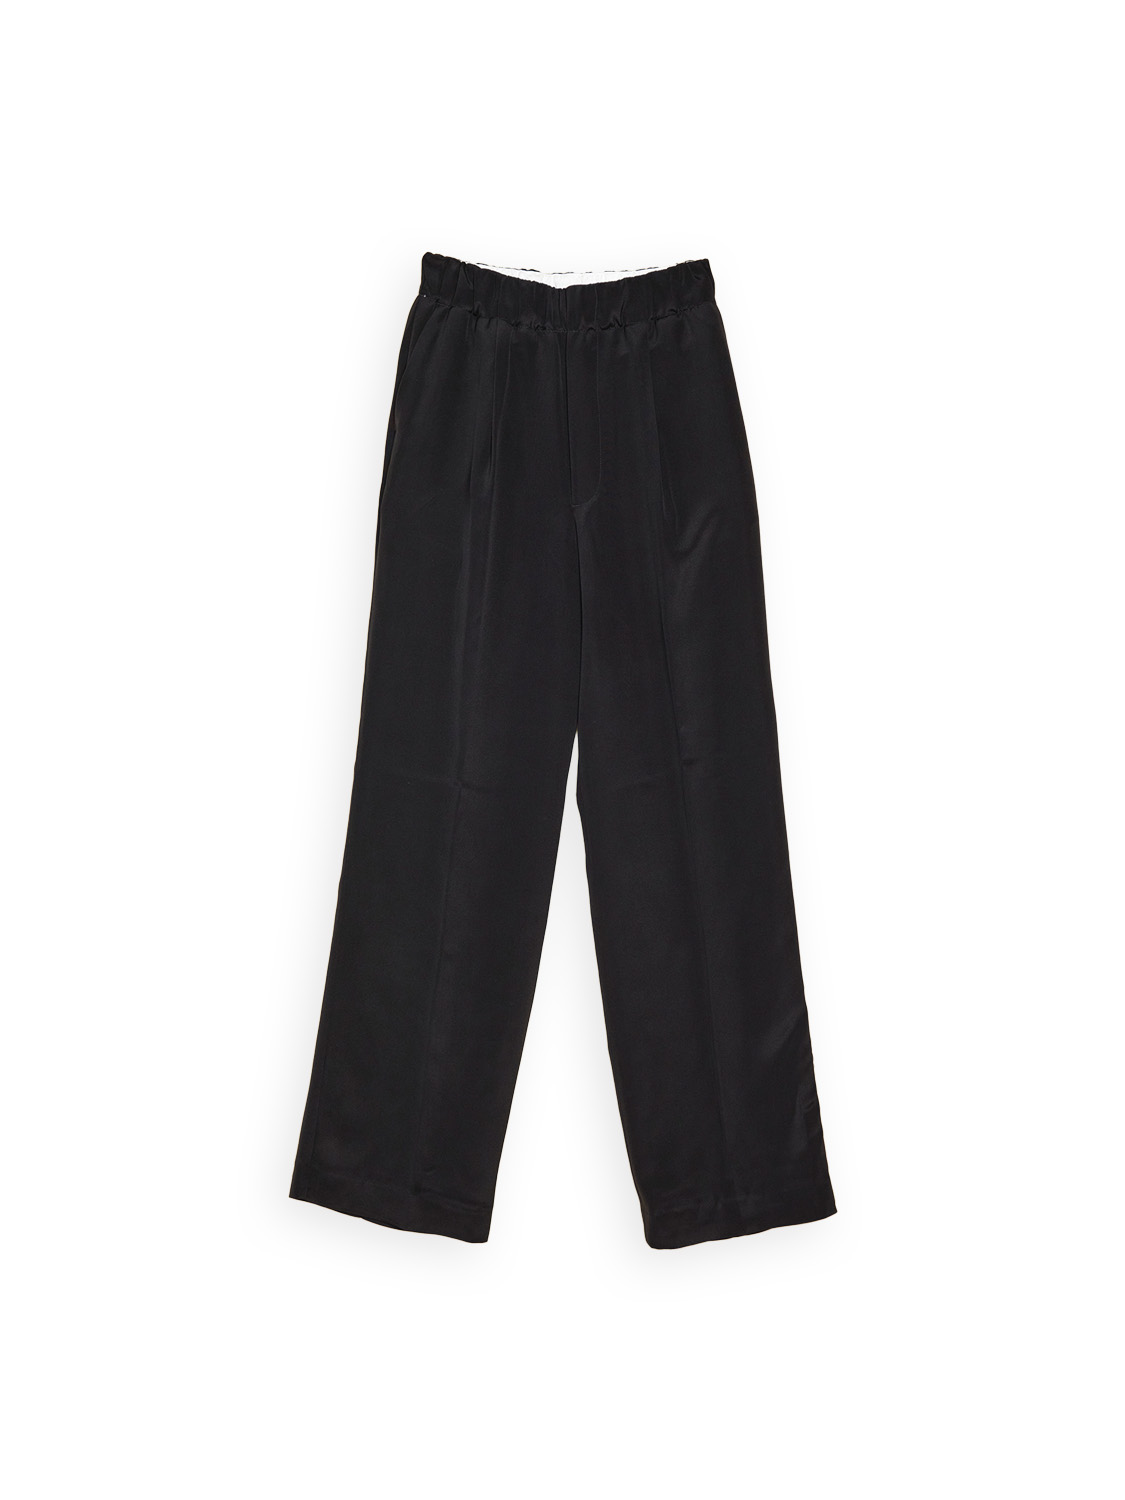 nine in the morning Silk trousers Chino style  black 26